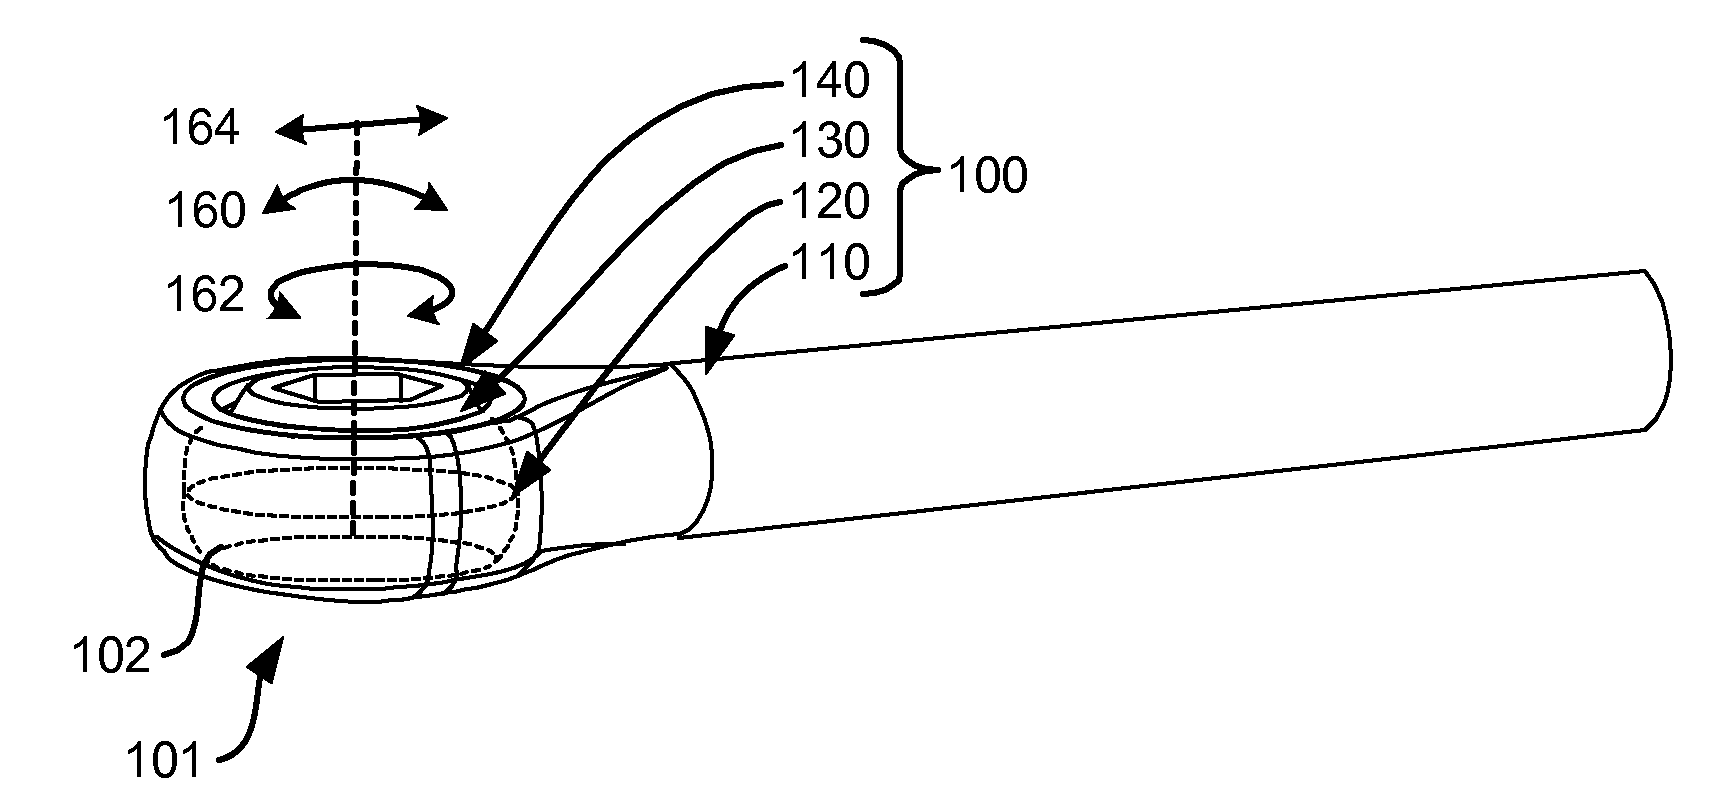 Adaptive spinal rod and methods for stabilization of the spine